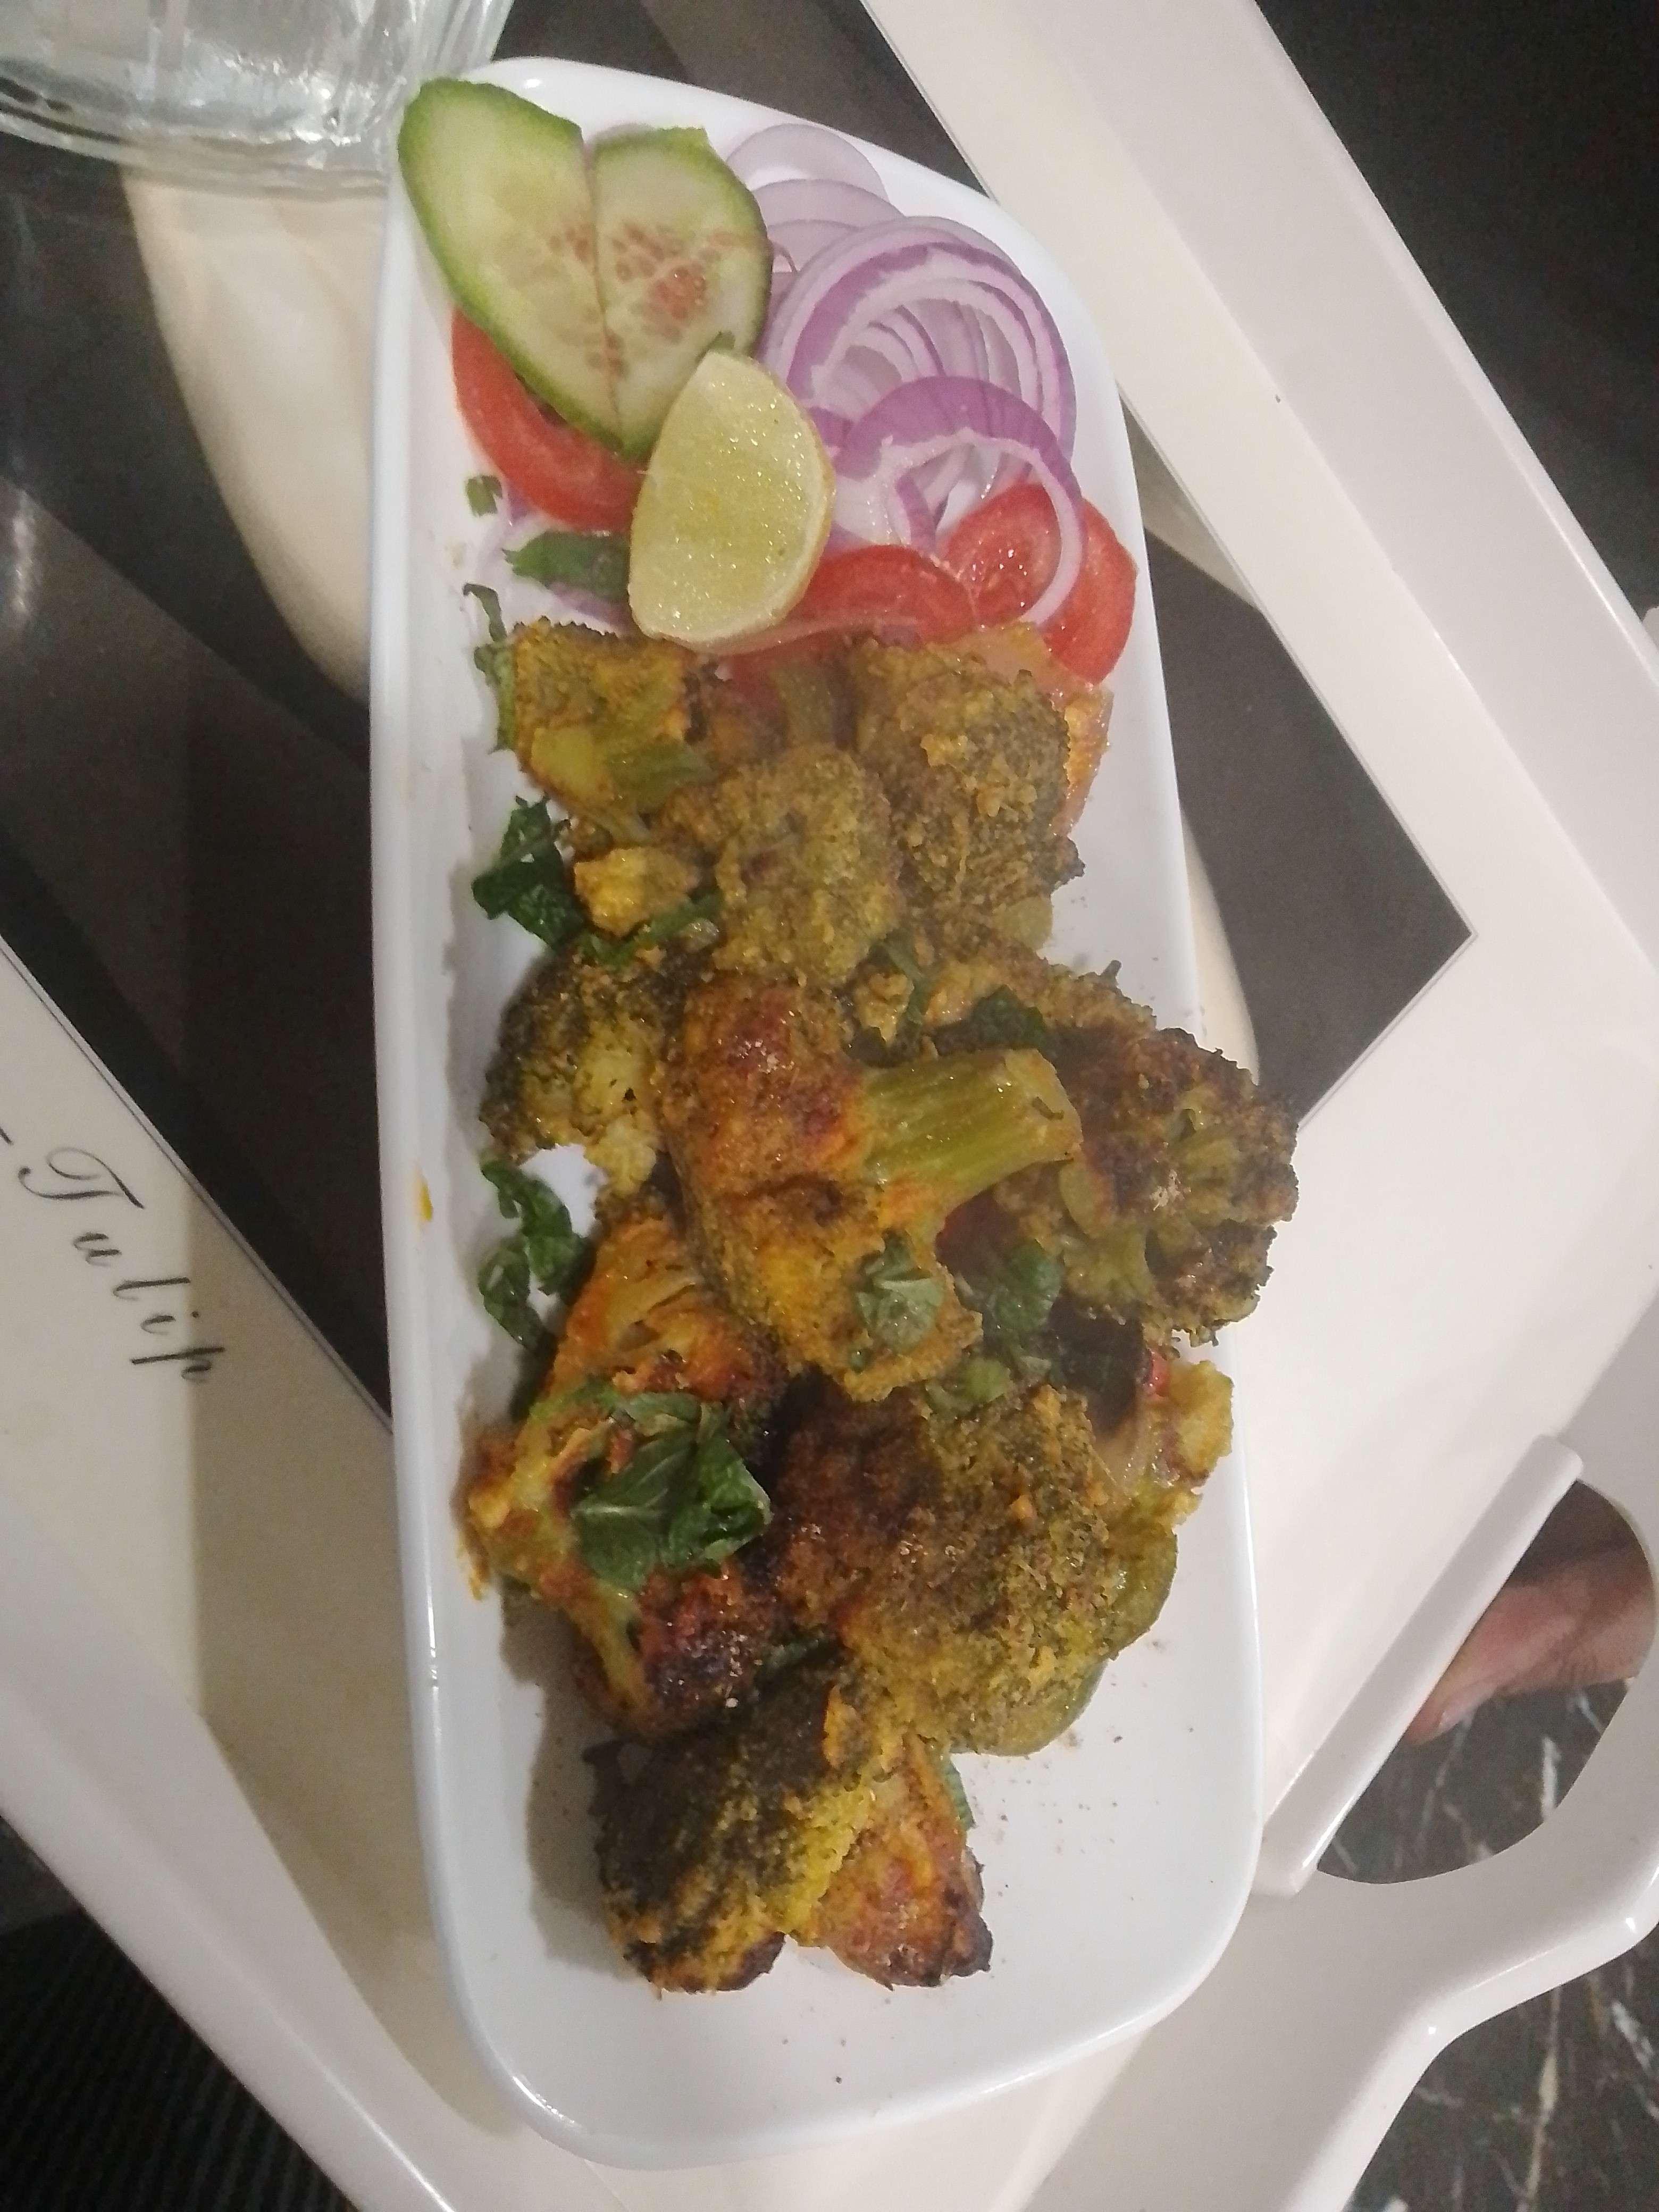 Tasty Tandoori Broccoli cooked by COOX chefs cooks during occasions parties events at home